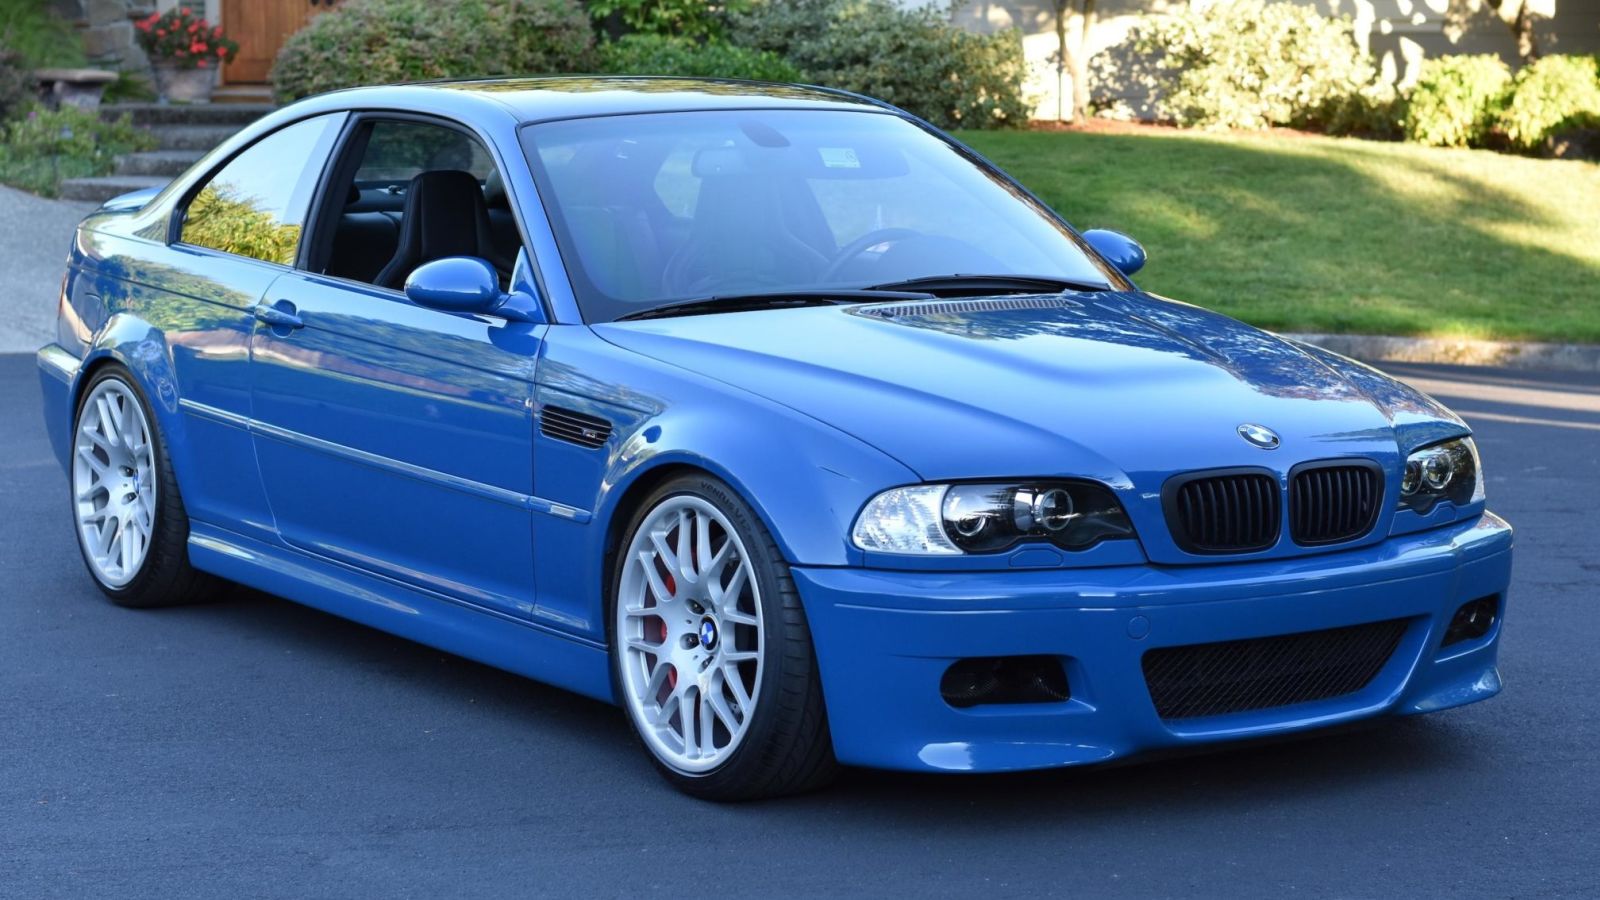 Illustration for article titled $90,000 for a low mileage E46 M3?